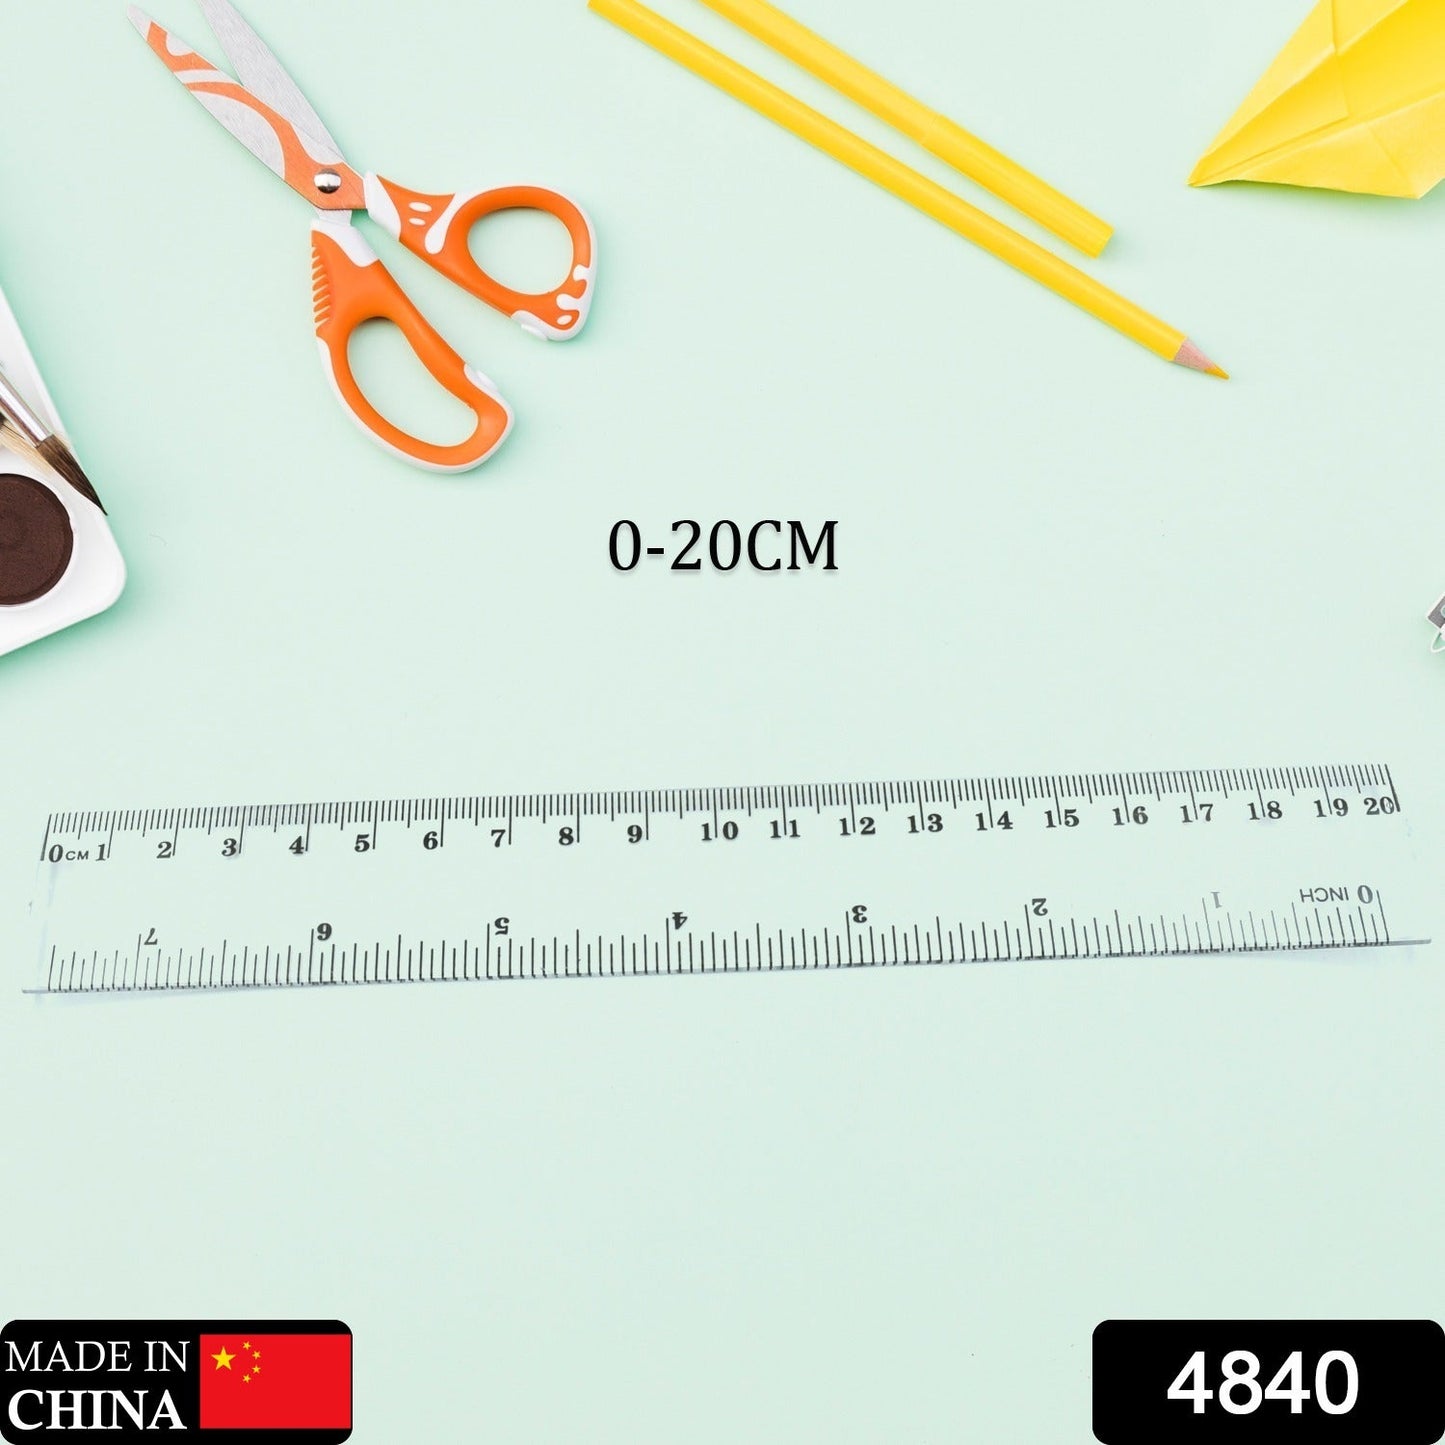 4840 20Cm Ruler For Student Purposes While Studying And Learning In Schools And Homes Etc. (1Pc) - deal99.in